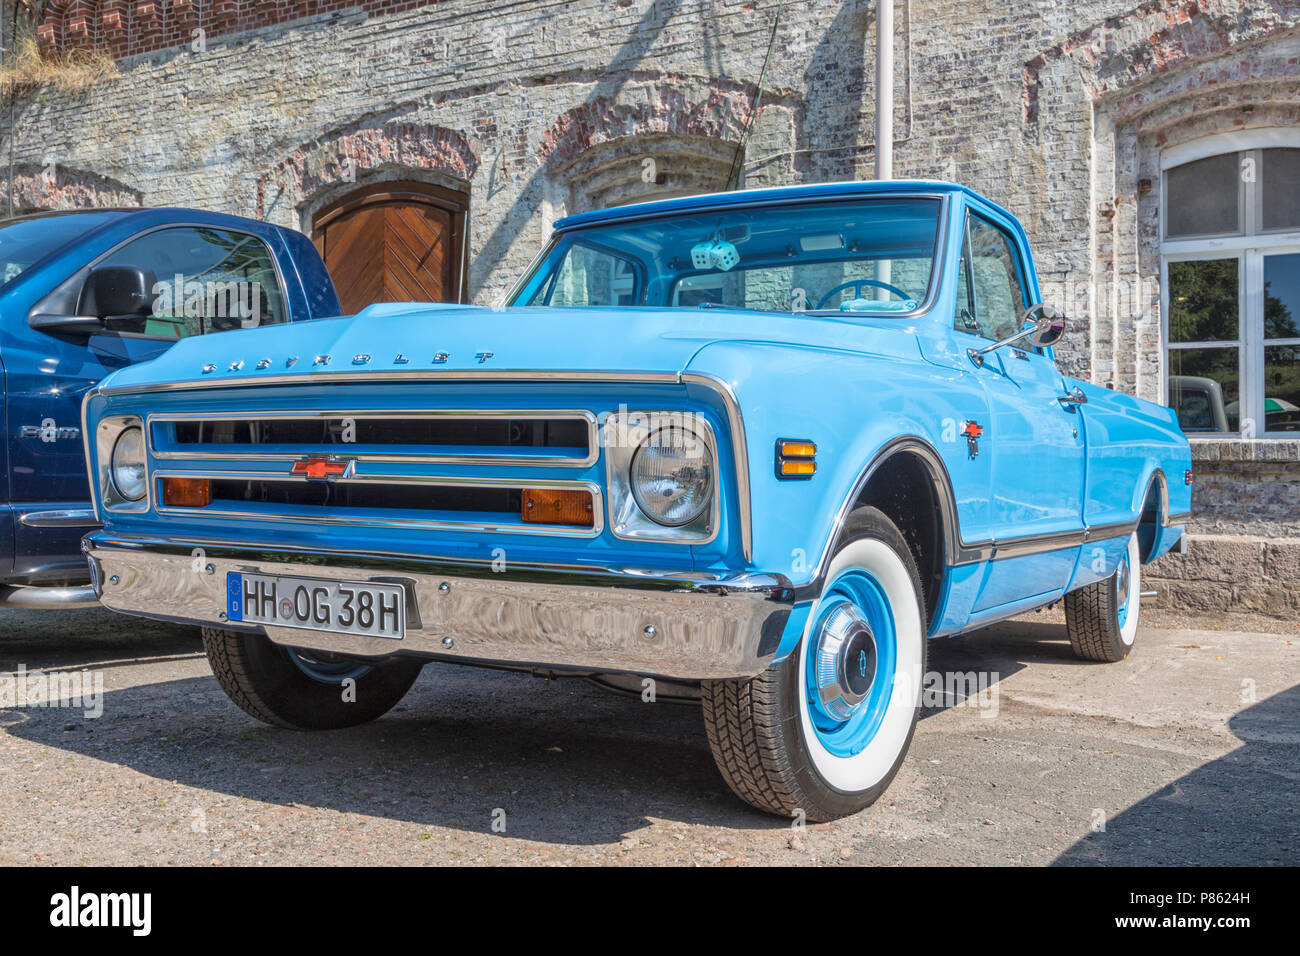 Stade, Germany - July 8, 2018: A vintage 1967 Chevrolet C/K 10 pickup truck at 5th Summertime Drive US car meeting. Stock Photo